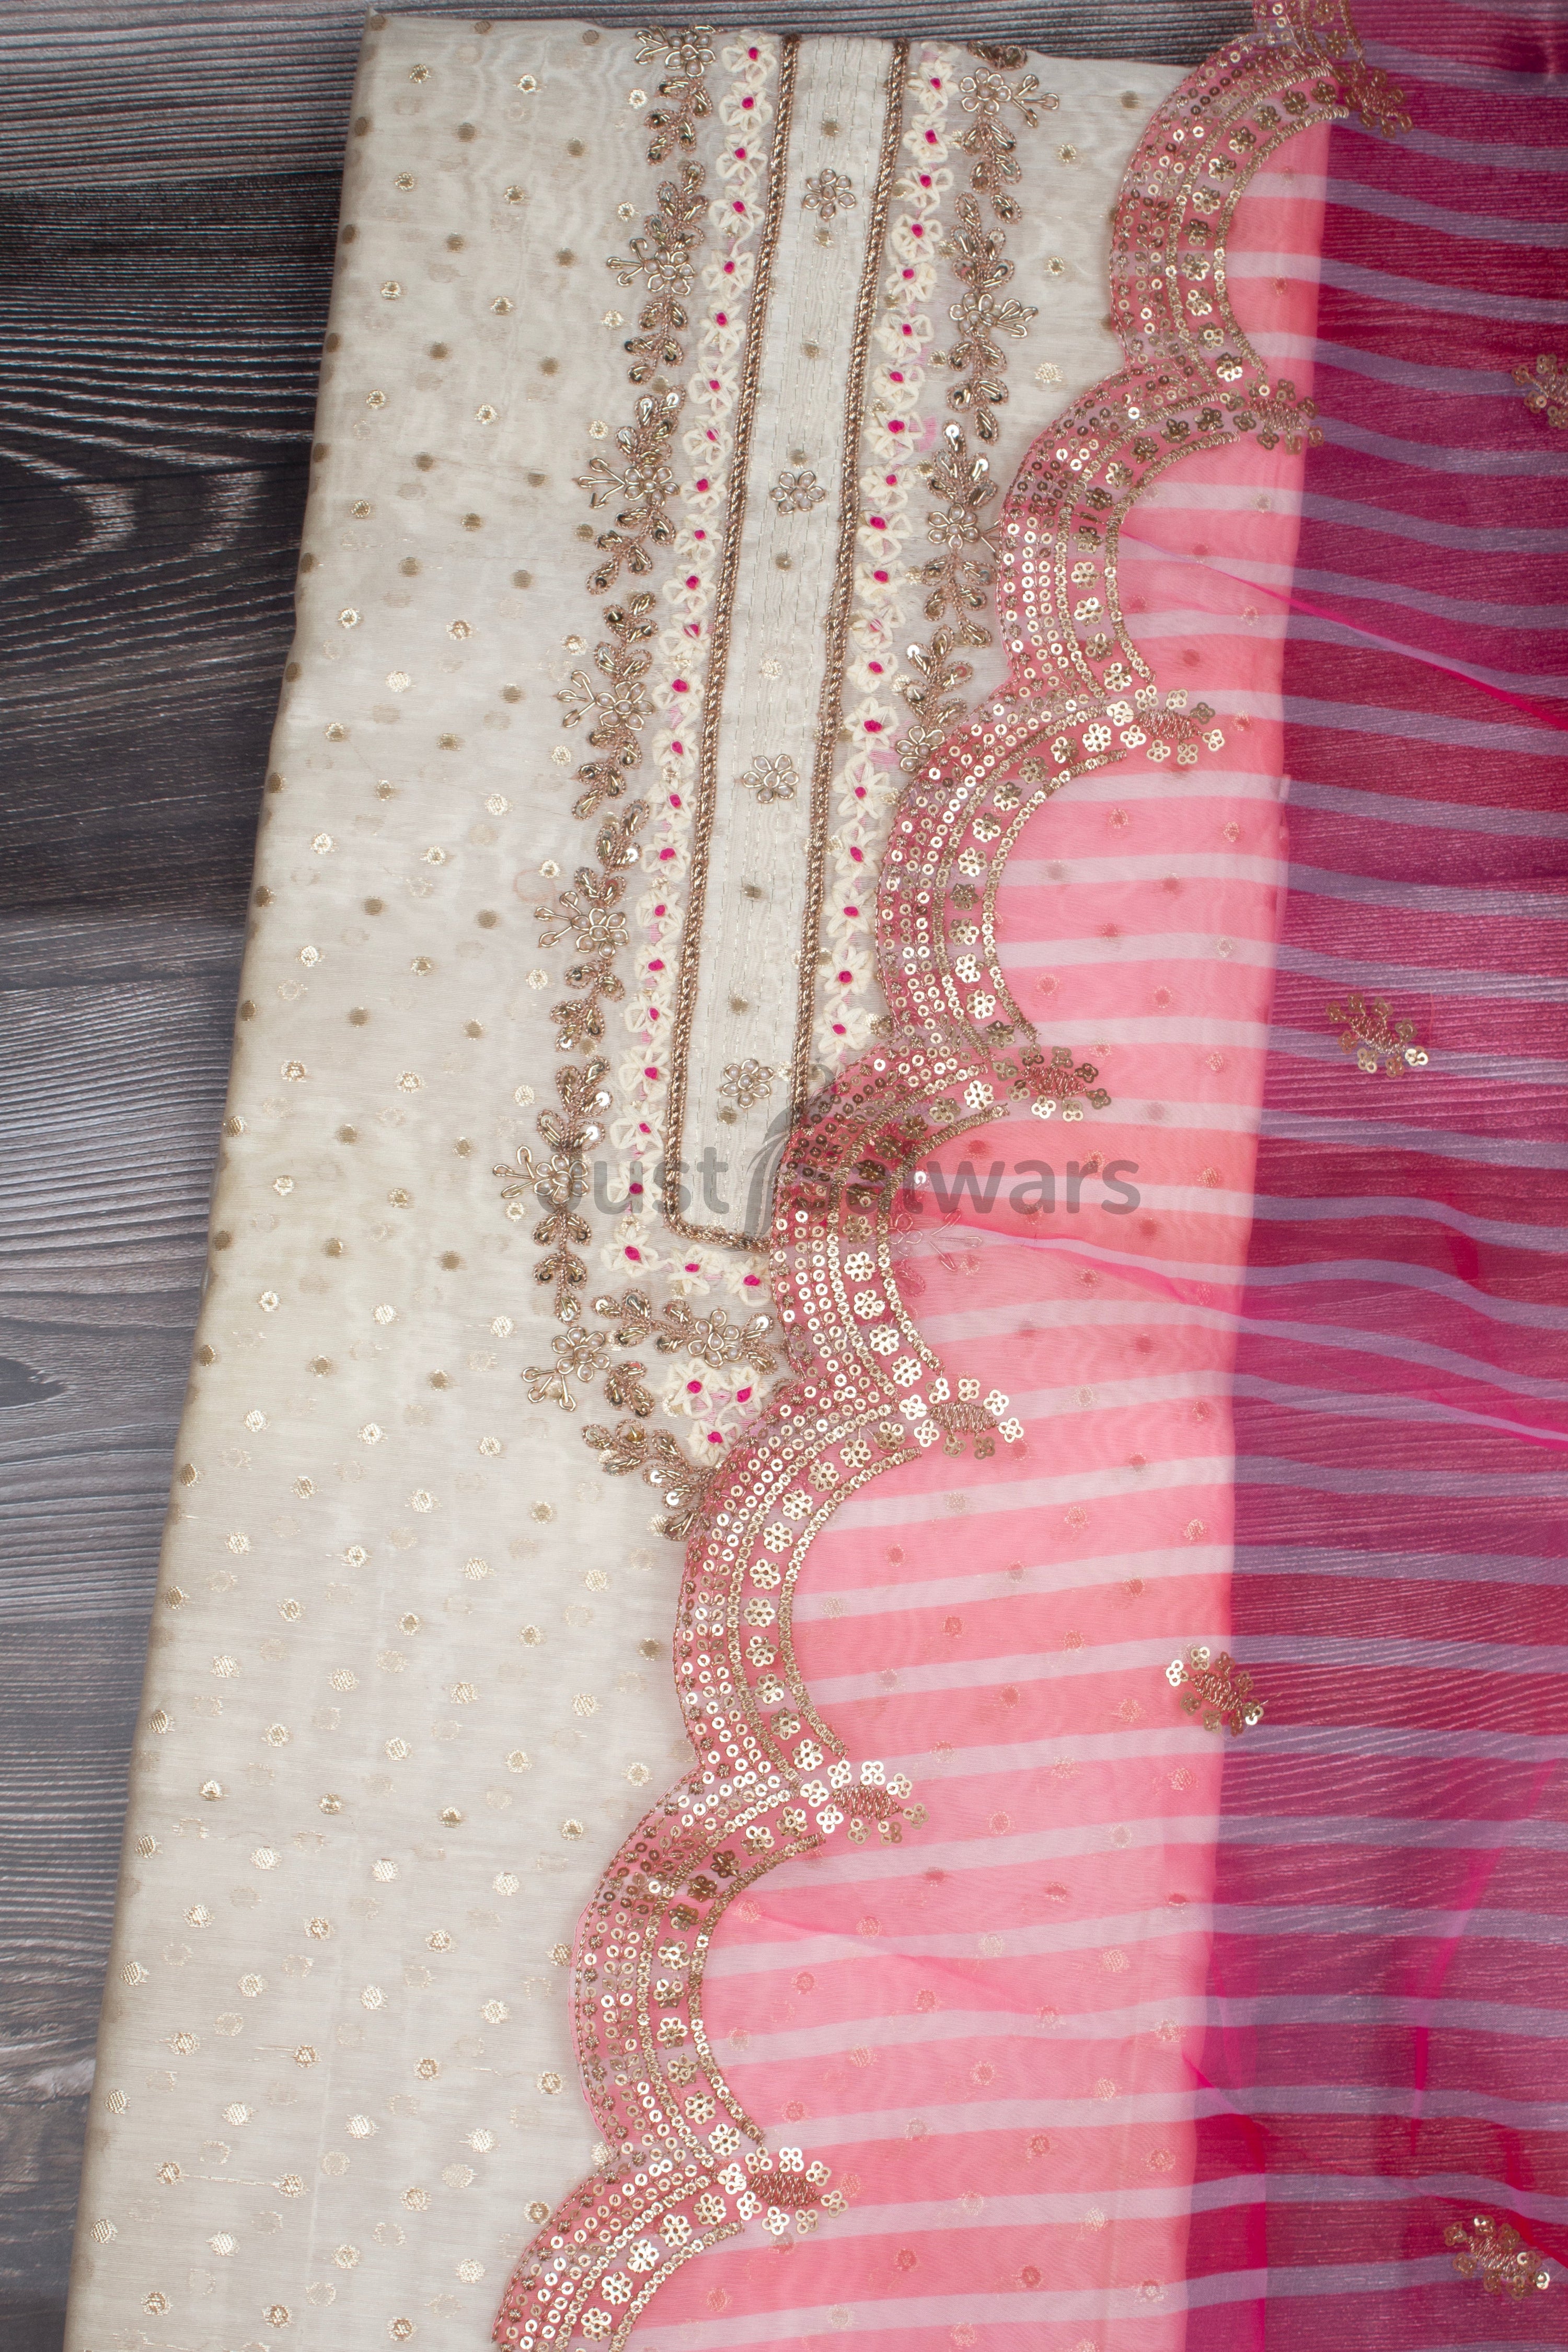 Cream and Rani Pink Colour Silk Cotton Unstitched Dress Material -Dress Material- Just Salwars